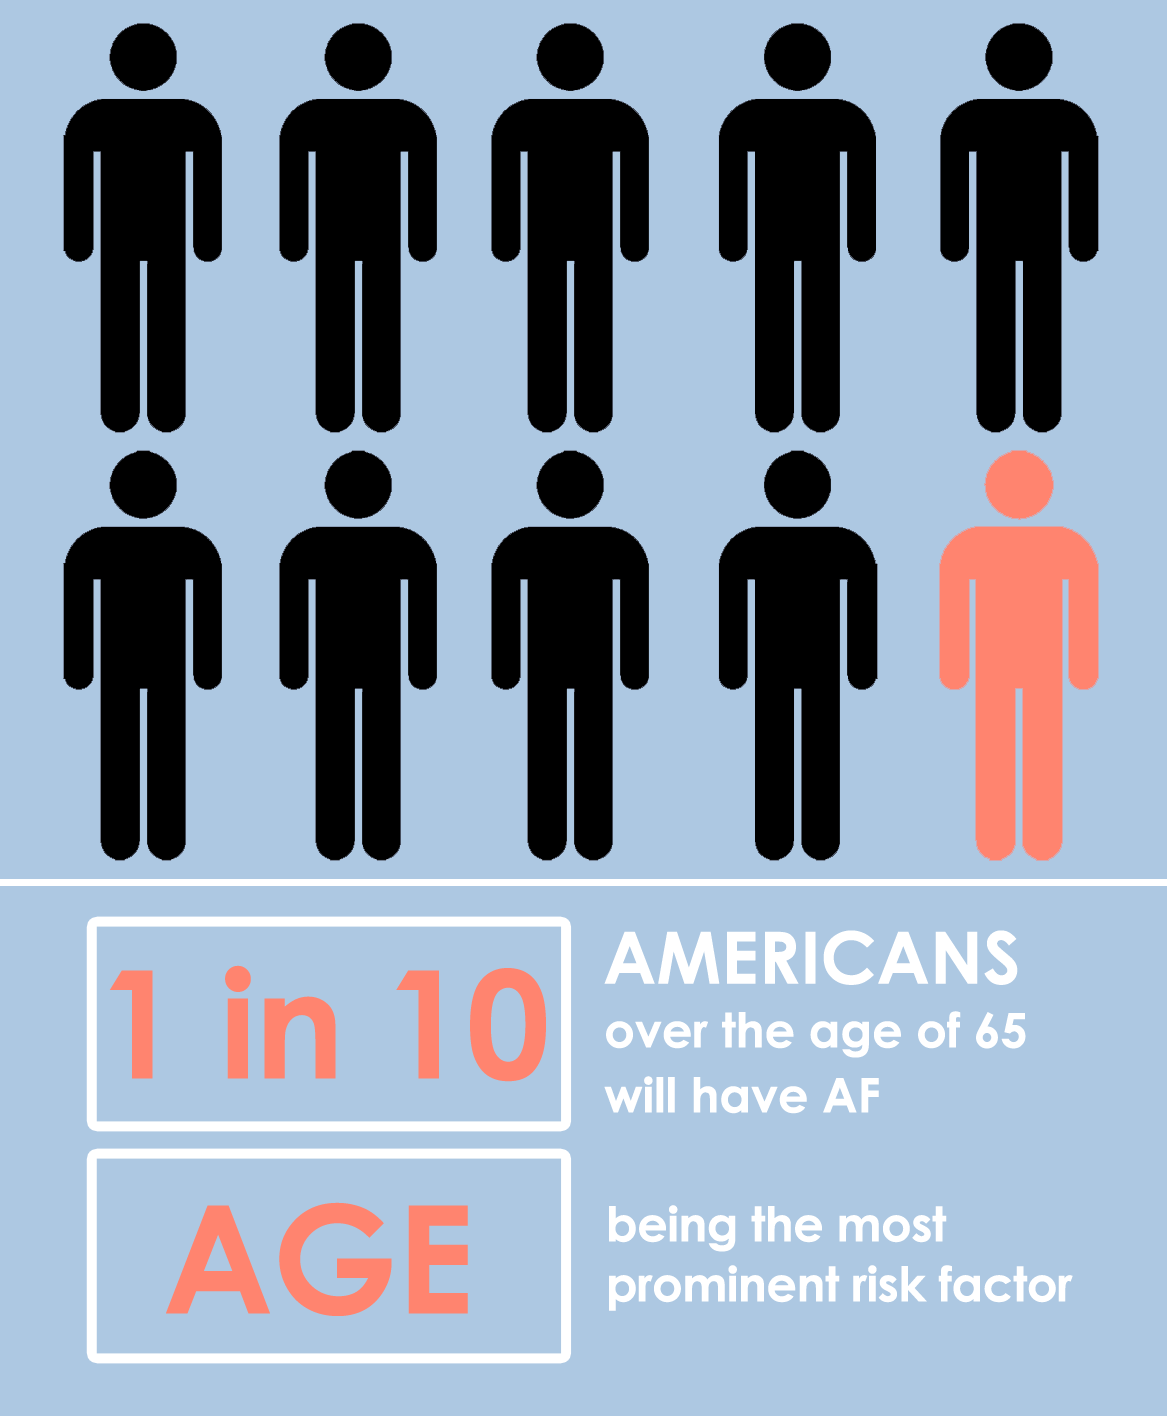 1 in 10 people will have Atrial Fibrillation, with age being the most prominent risk factor.